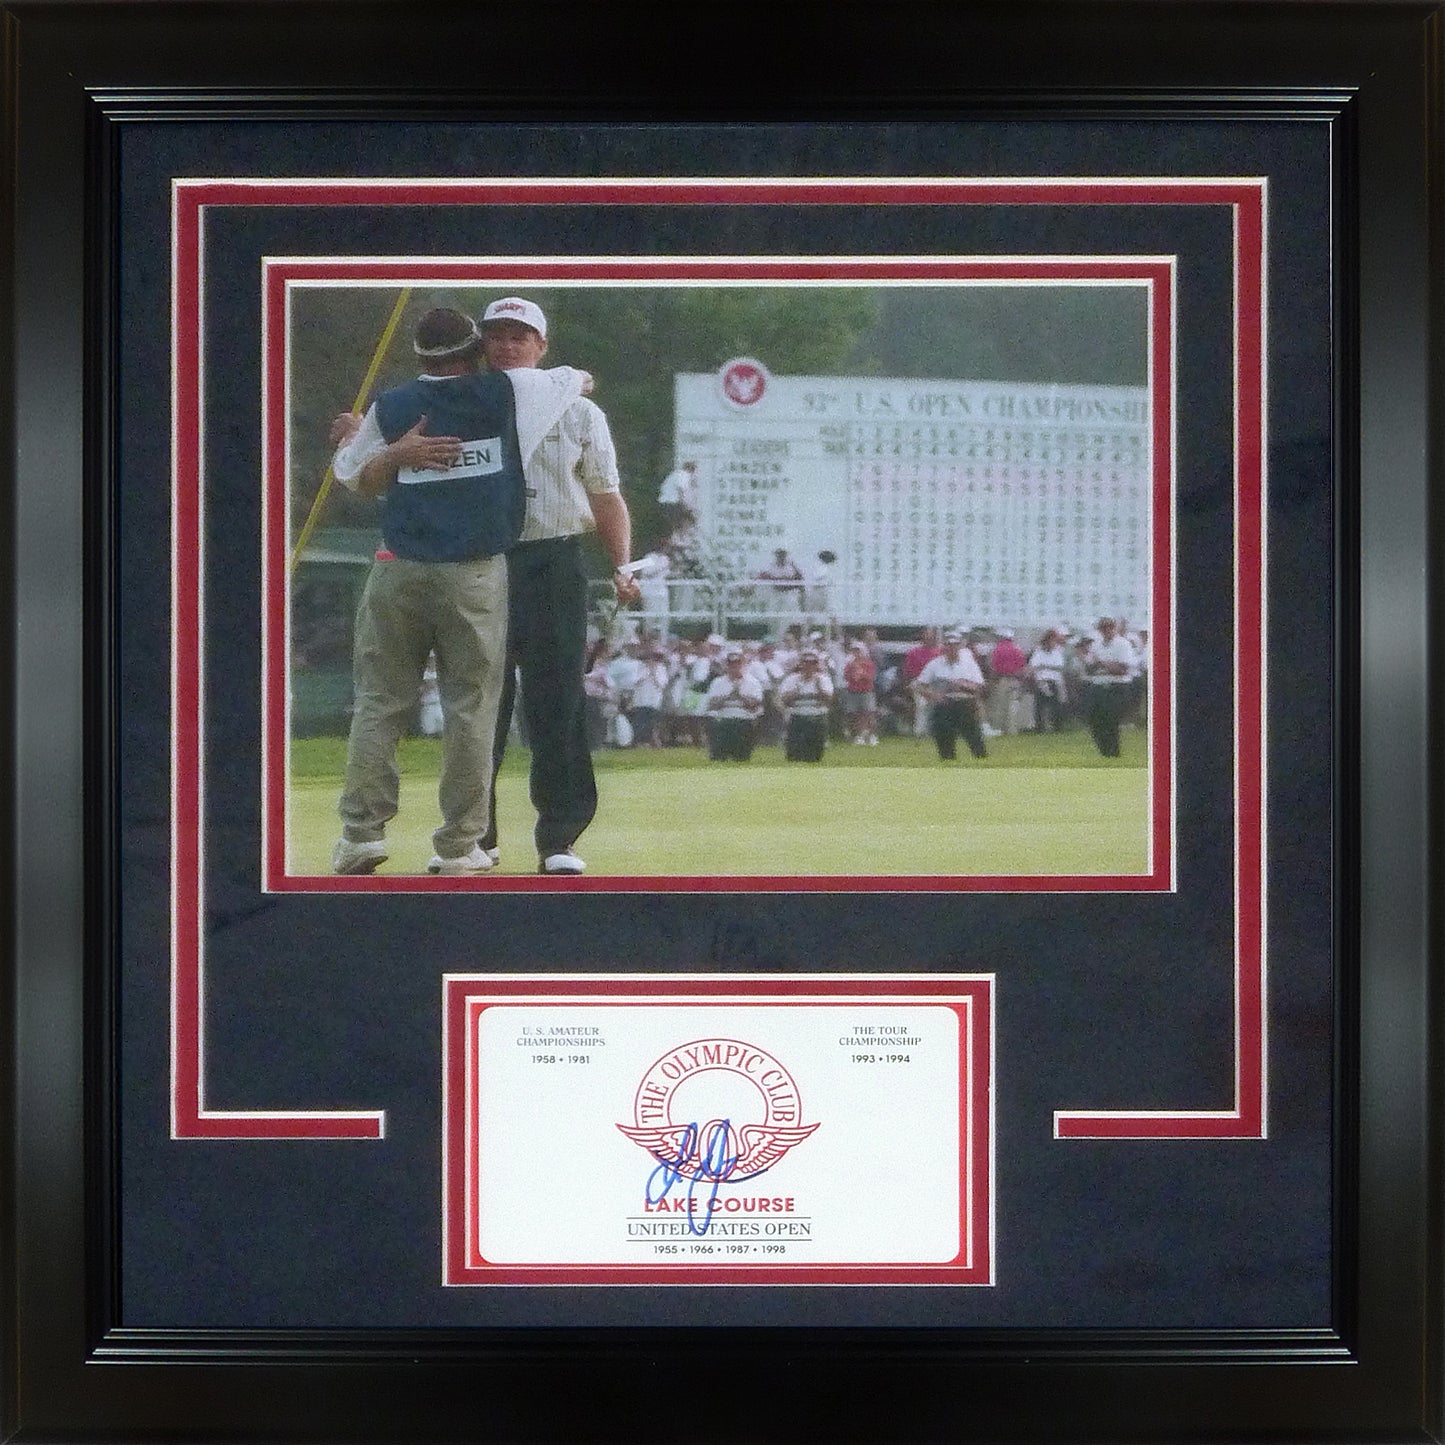 Lee Janzen Autographed Olympic Club Scorecard Deluxe Framed with 1998 US Open Trophy 8x10 Photo